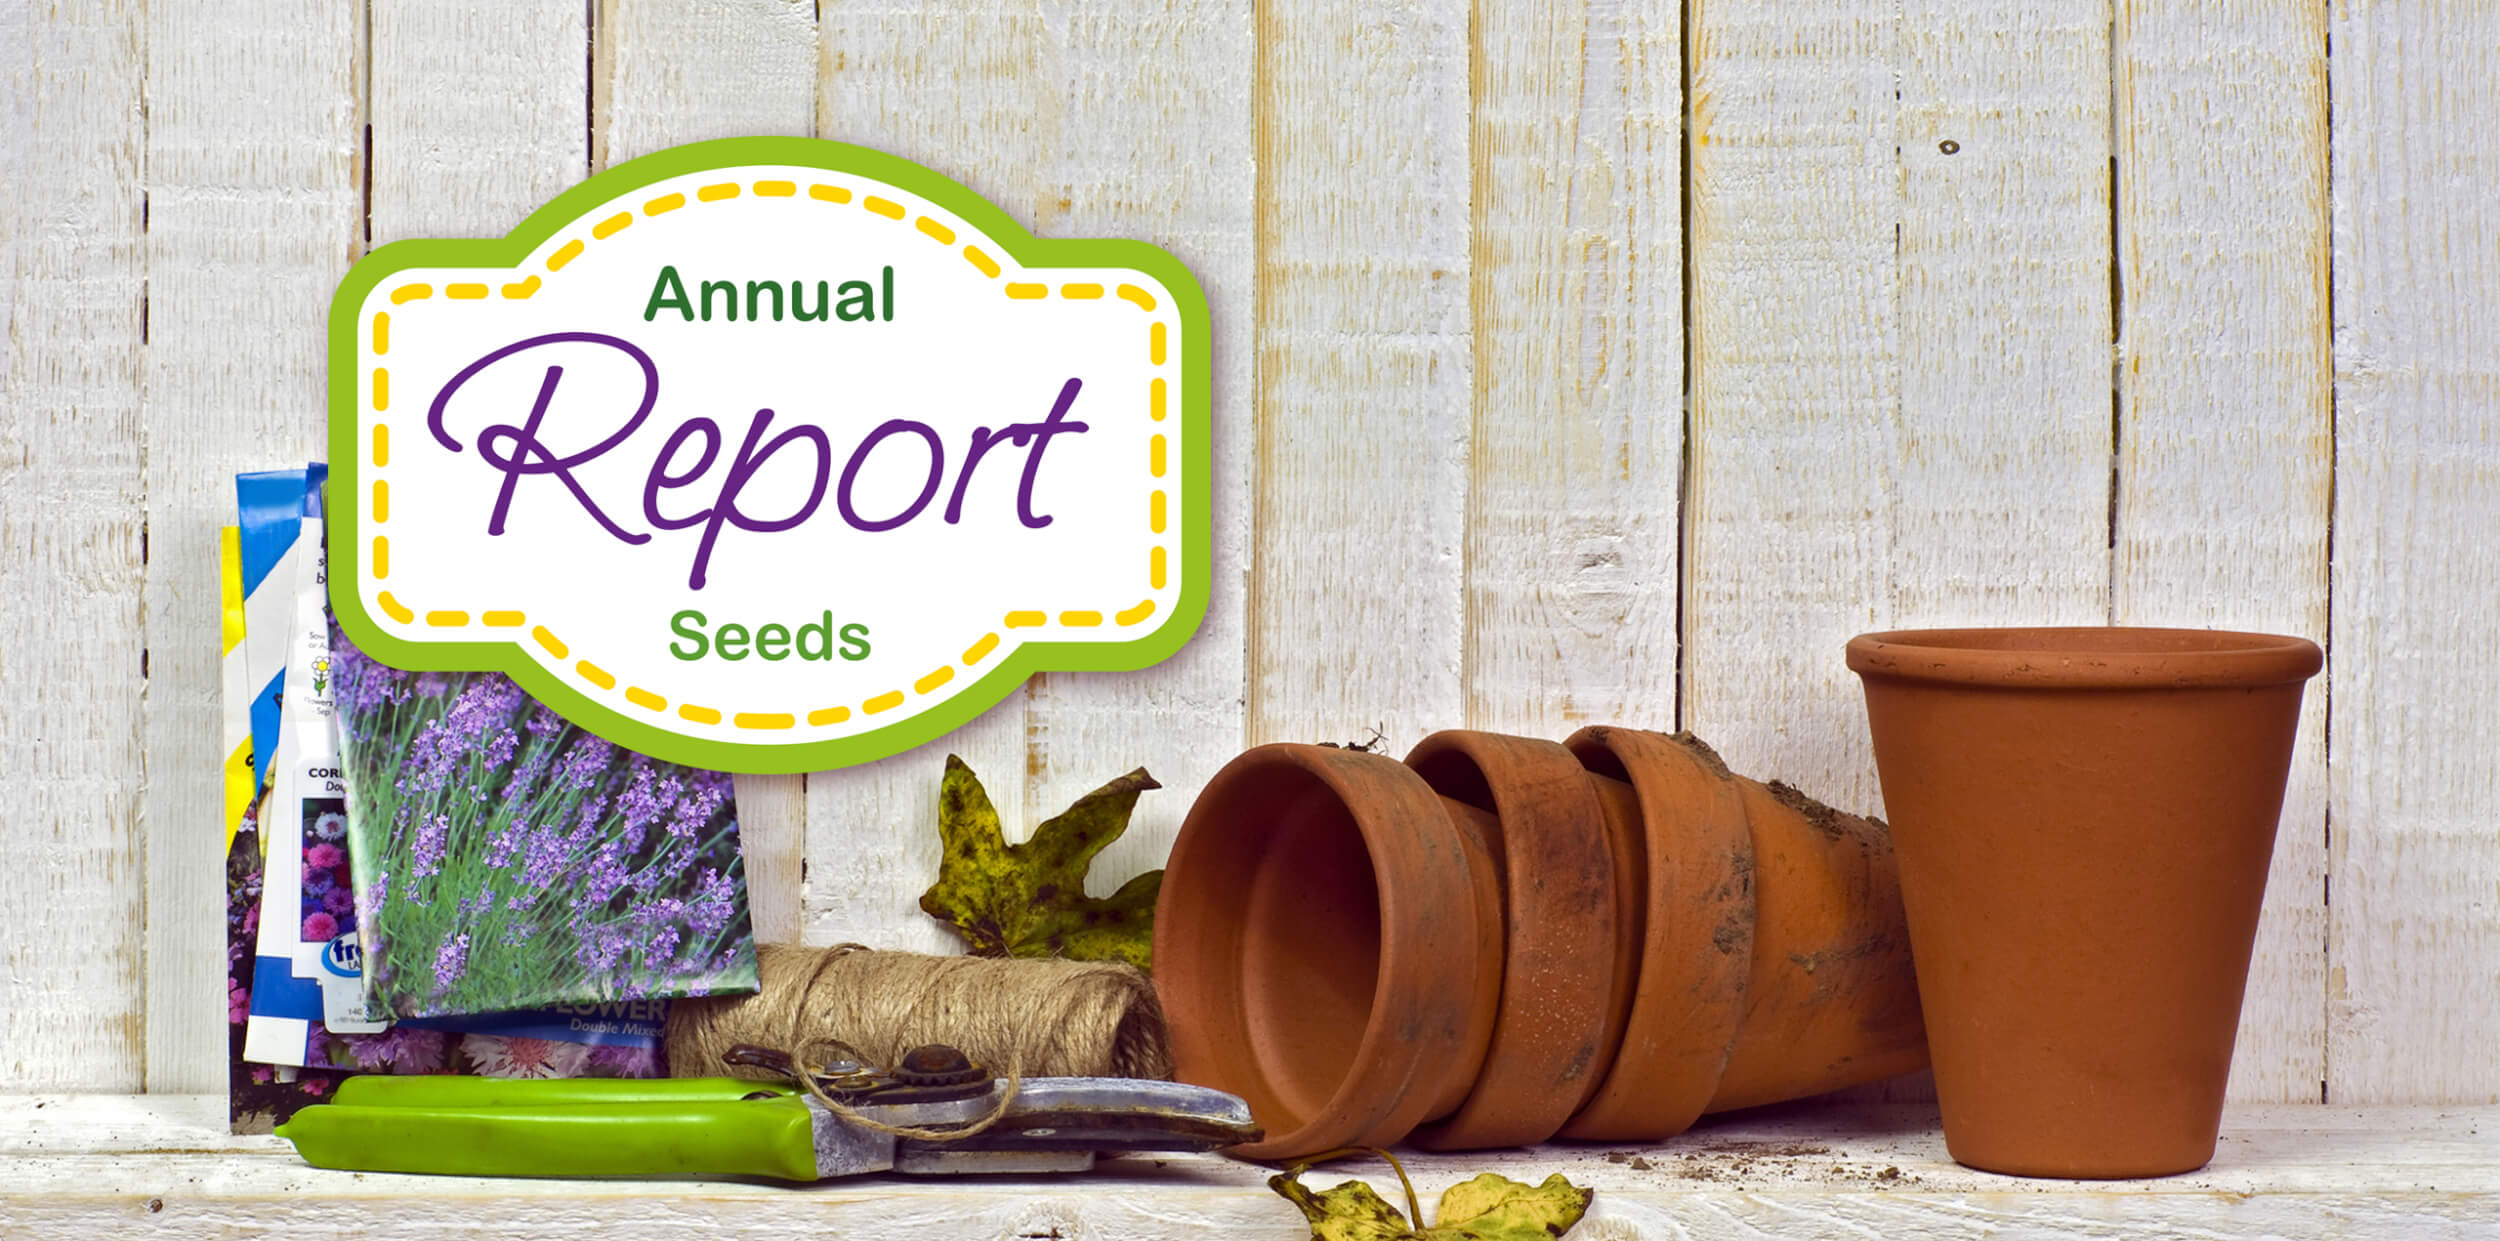 Annual Report Seeds with pots